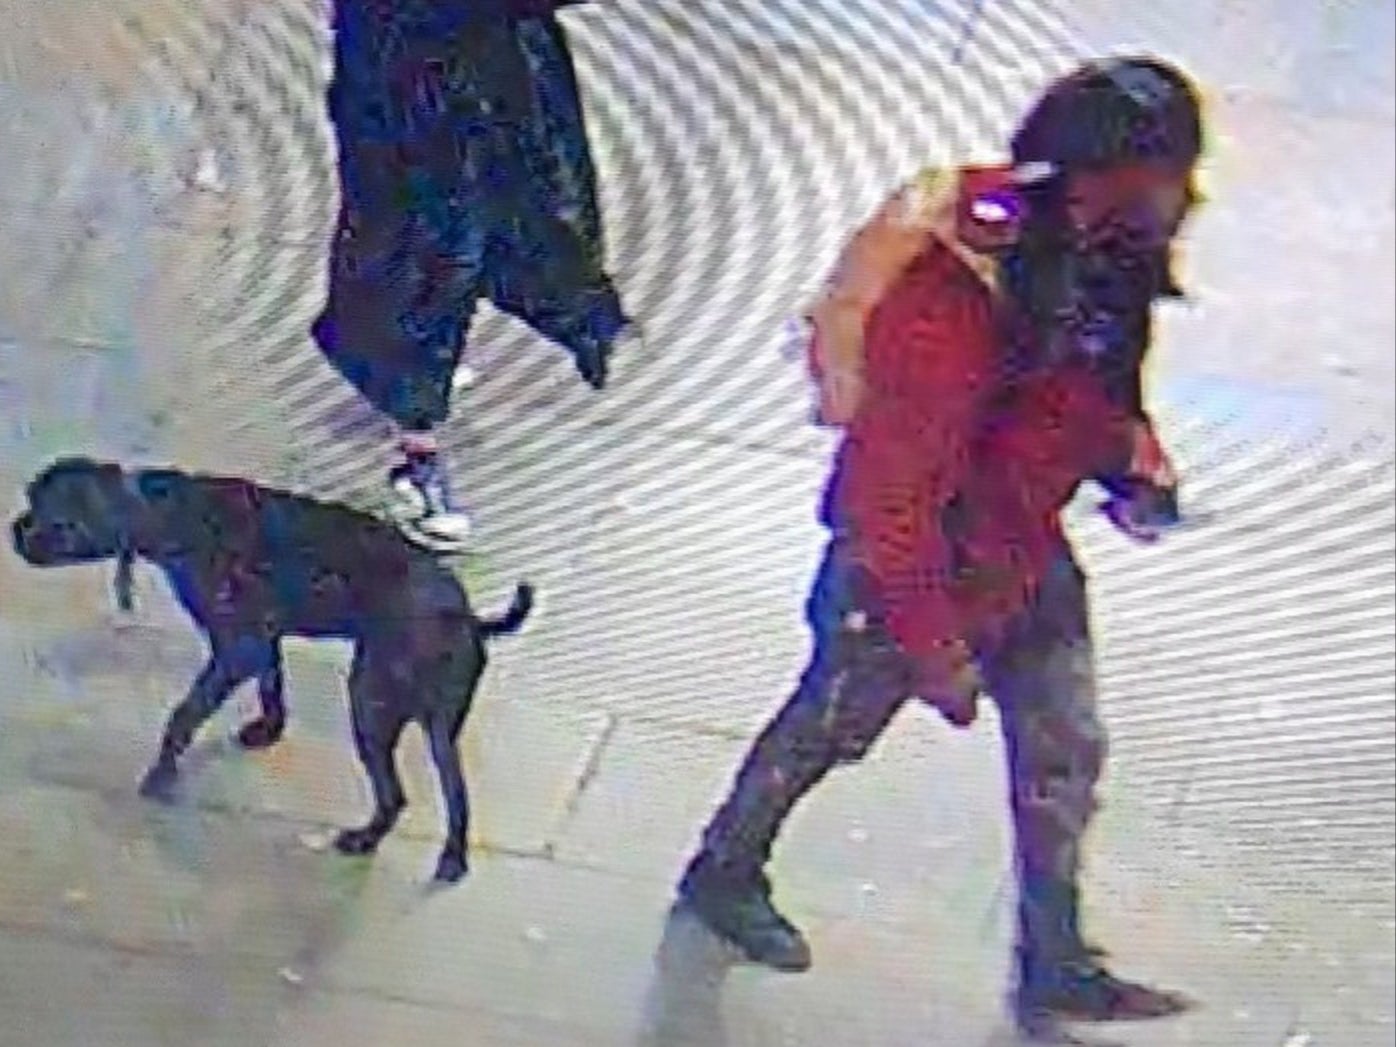 The victim was stabbed following a confrontation over the suspect’s dog fouling in the City of London in the early hours of Saturday